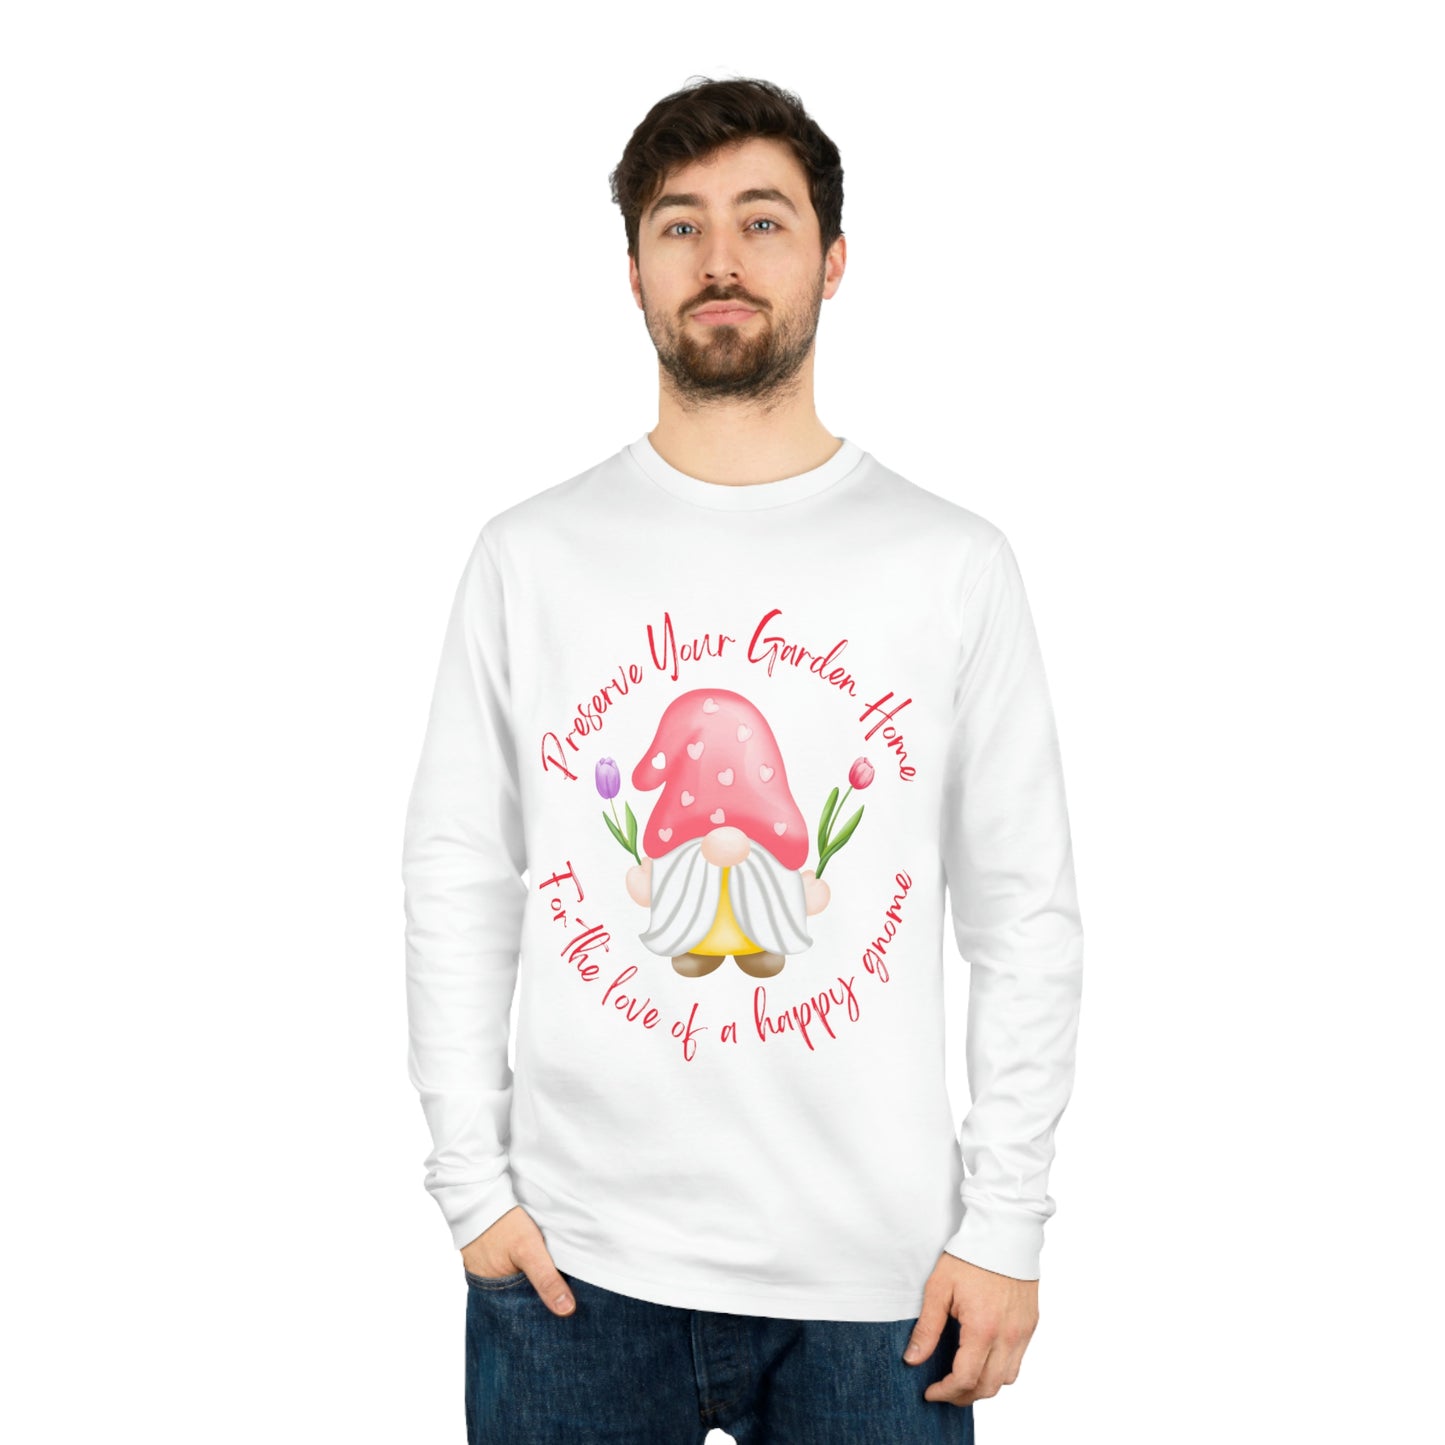 ‘Preserve your garden home, for the love of a happy gnome’ Eco-Friendly. Printed Front & Back.   Unisex Shifts Dry Organic Long Sleeve Tee